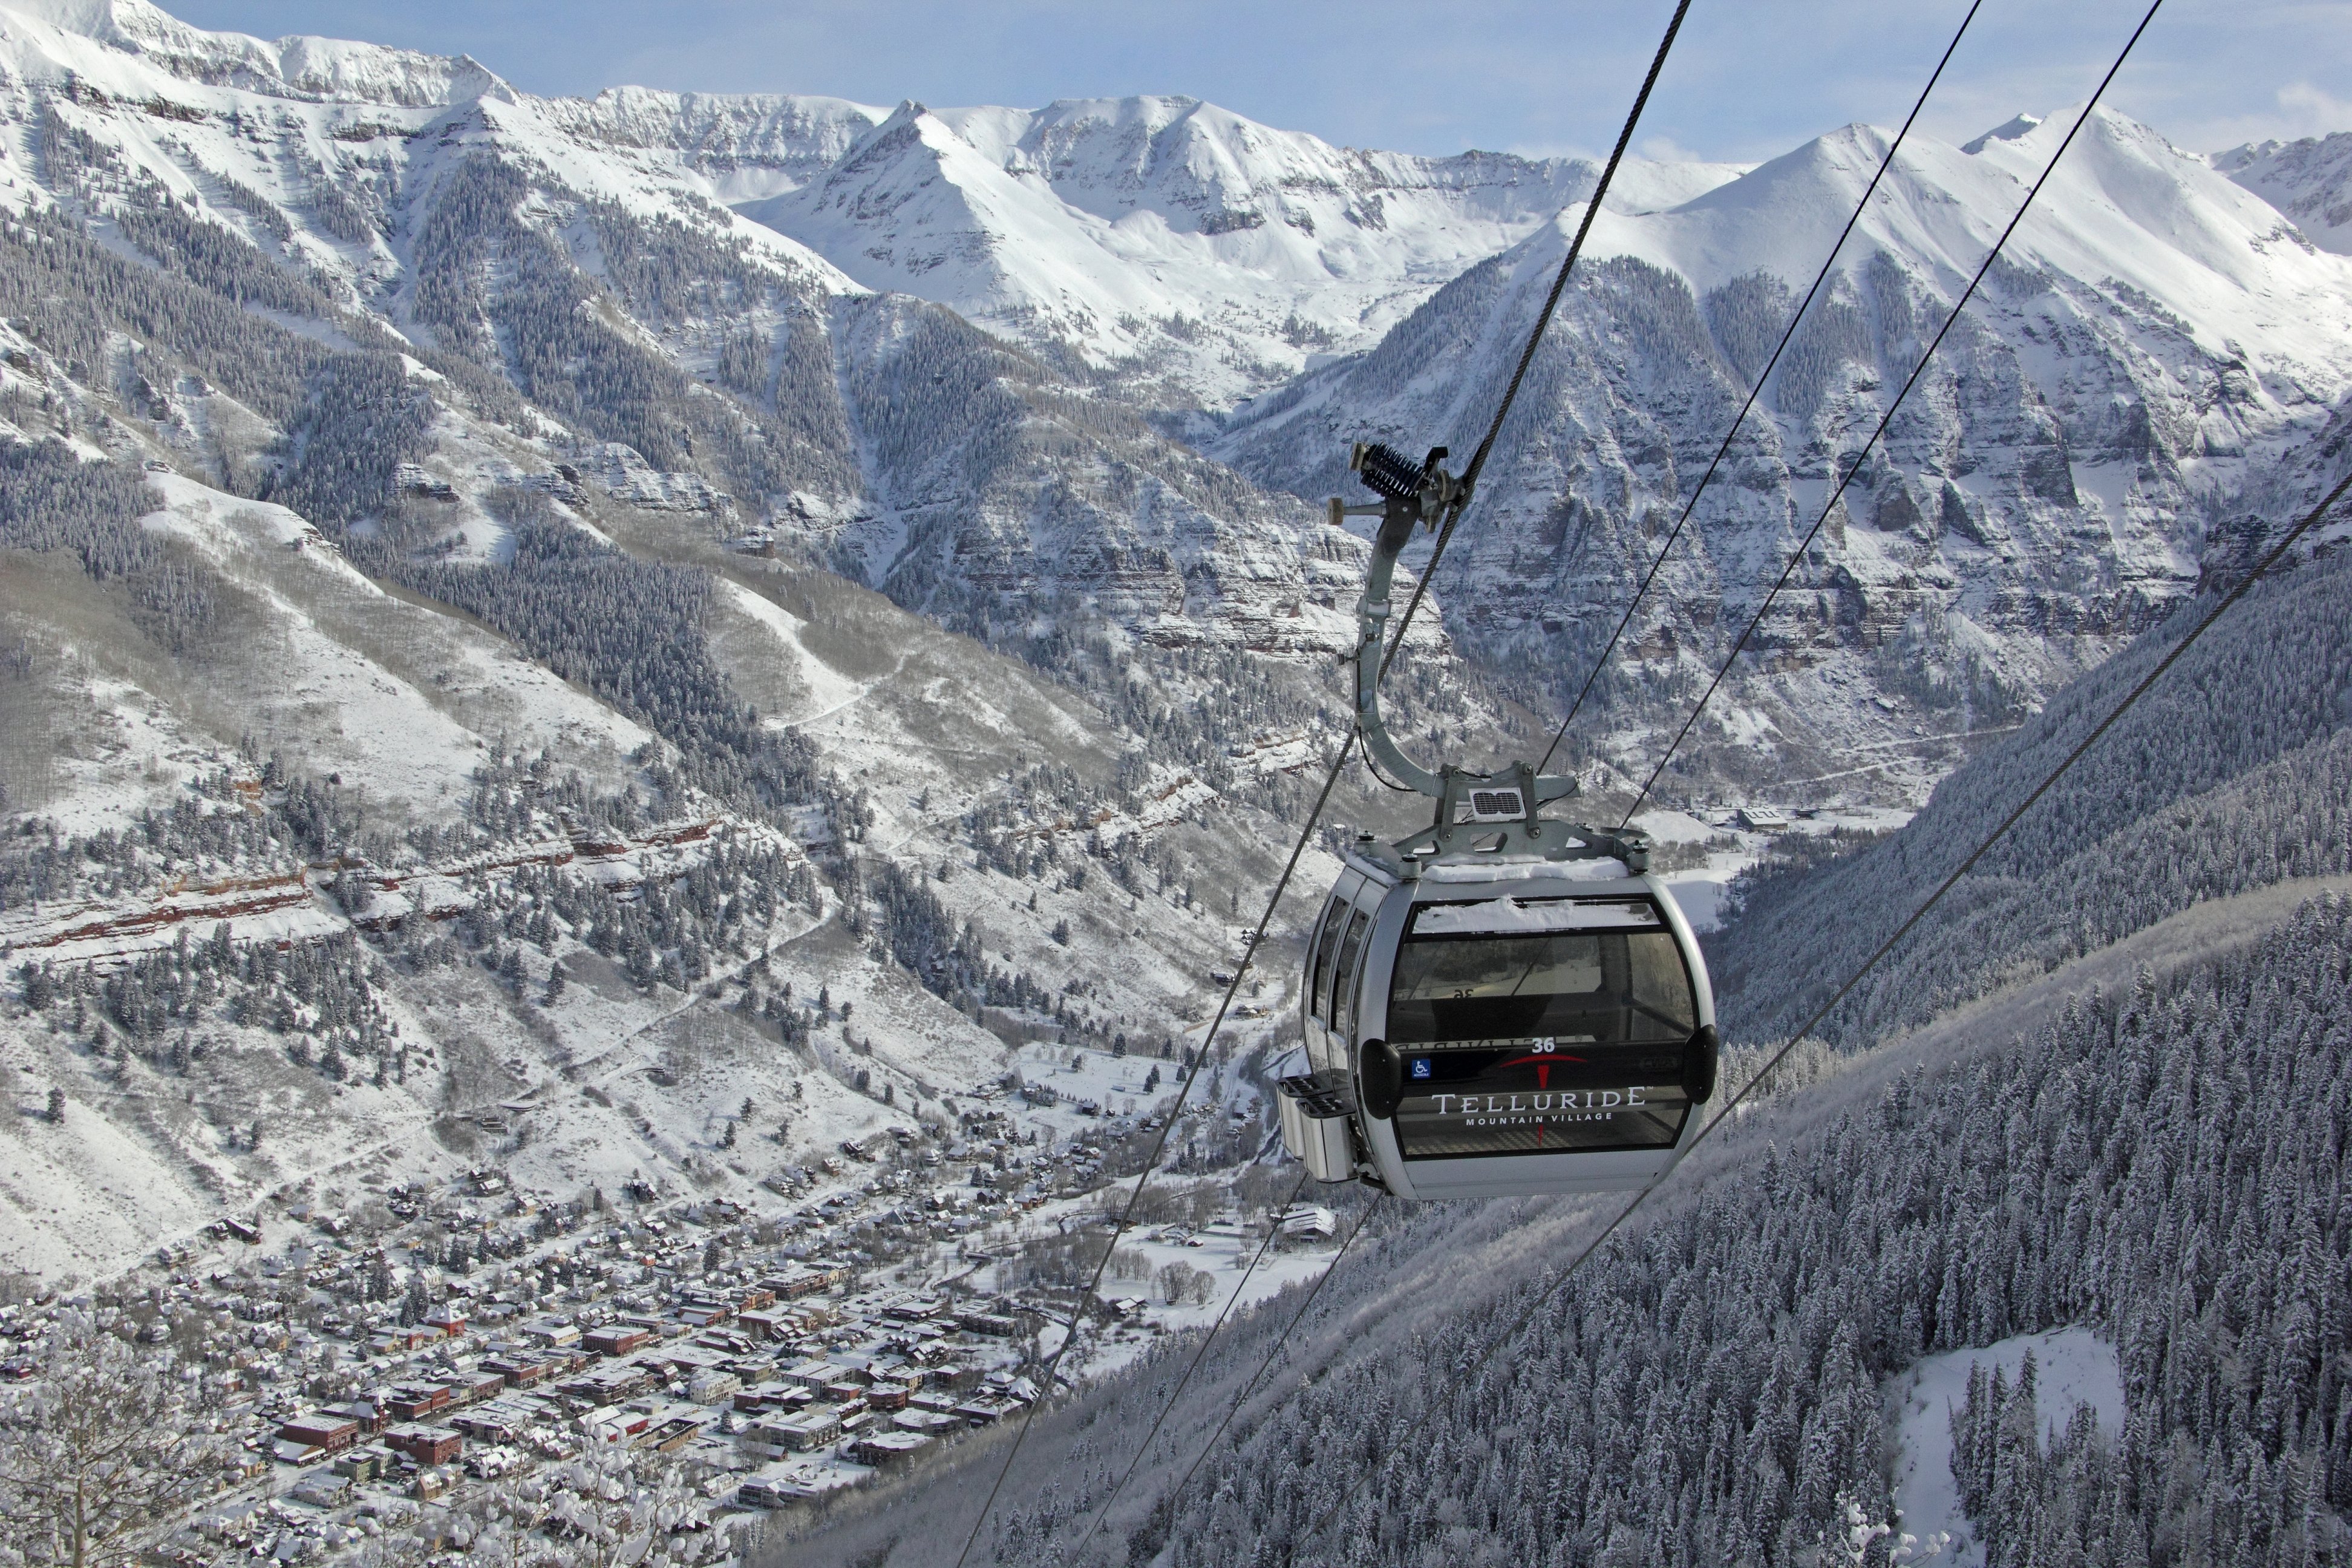 Telluride's famous gondola. The gondola connects the town of Telluride to Mountain Village. Some say it is possibly the best free public transportation around.